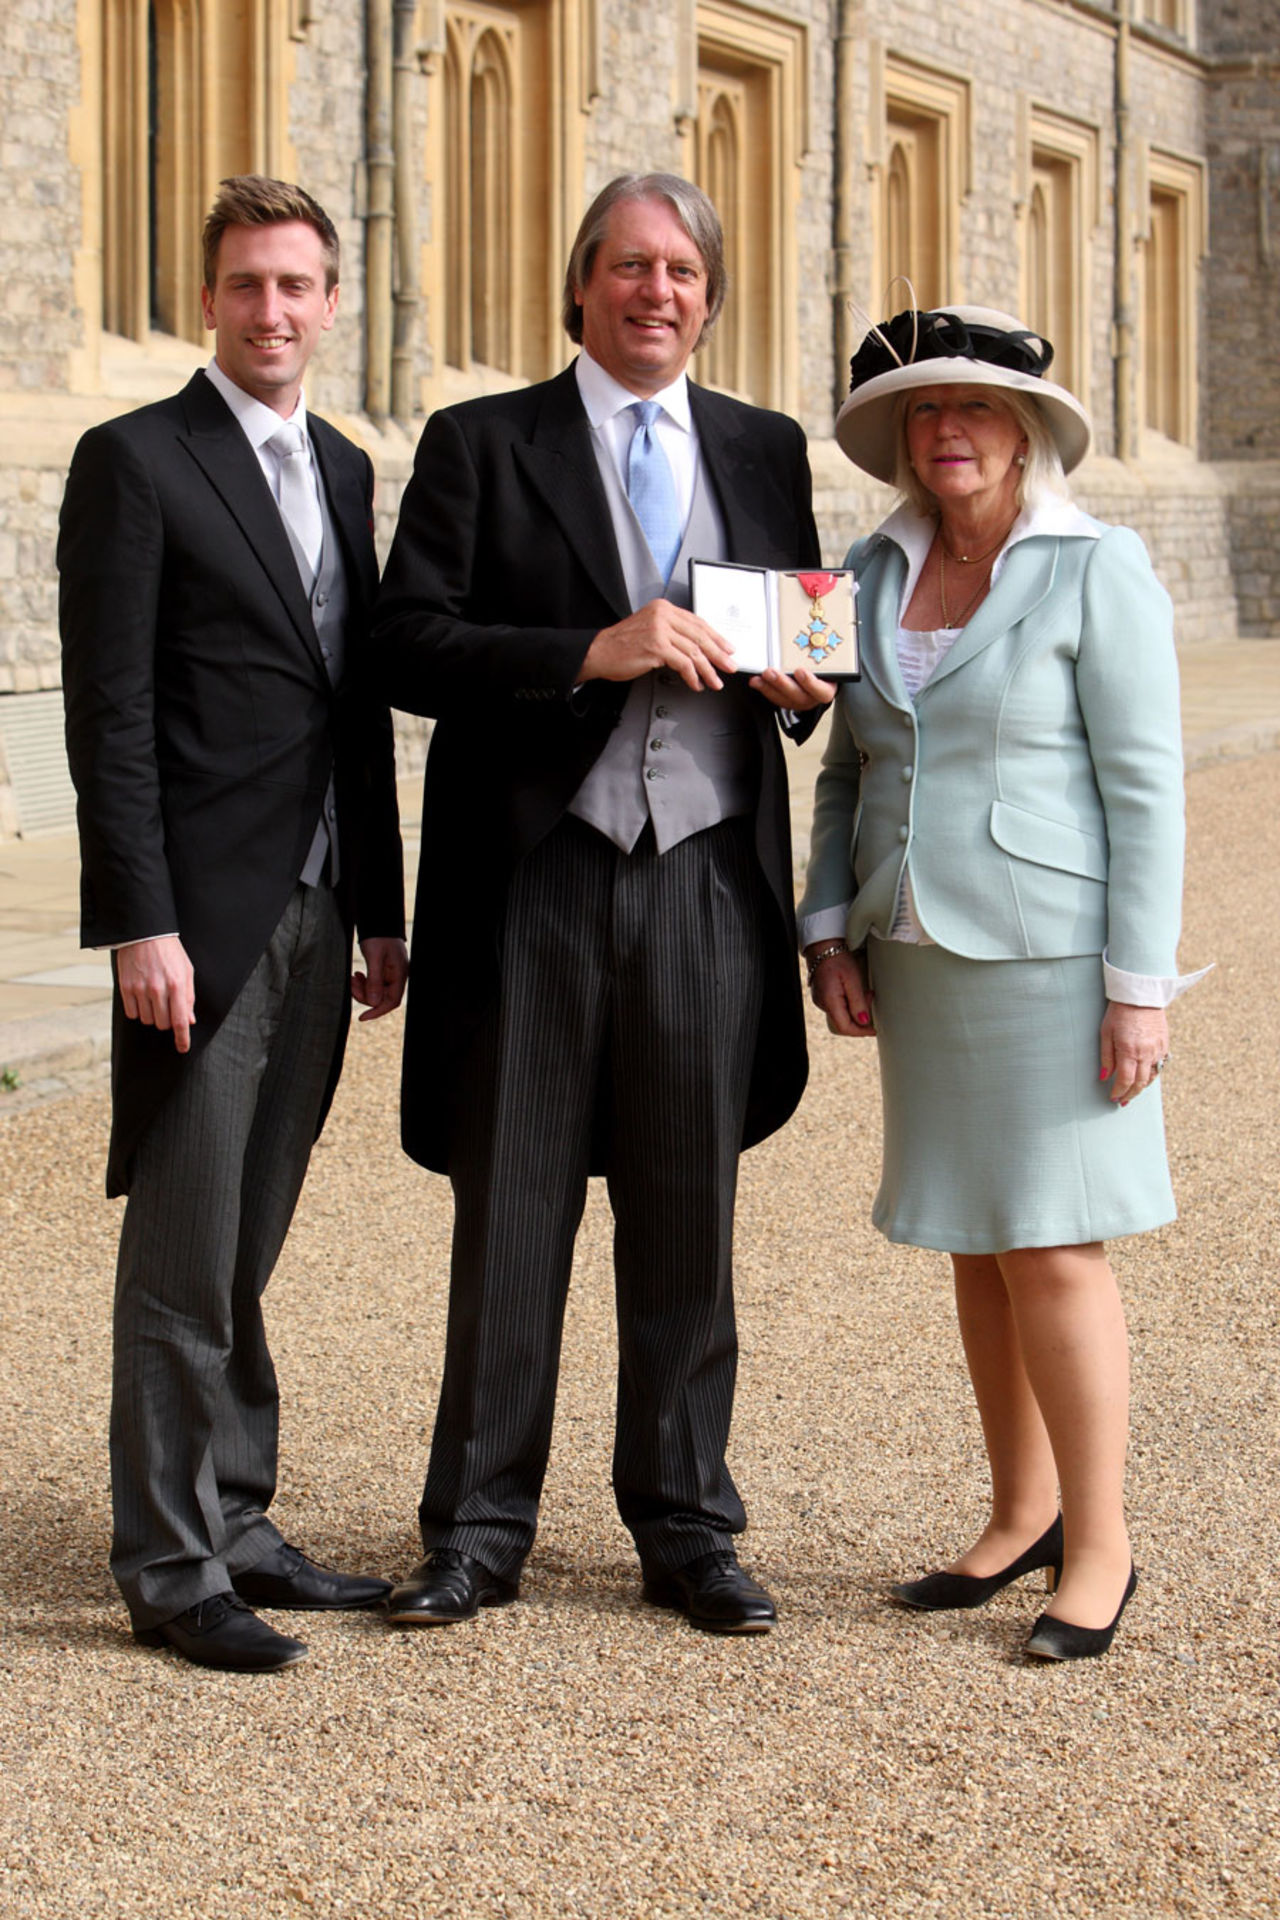 ECB head Giles Clarke, with his wife Judy and son Jack, poses with his CBE that was presented by Queen Elizabeth II, Windsor, March 2, 2012